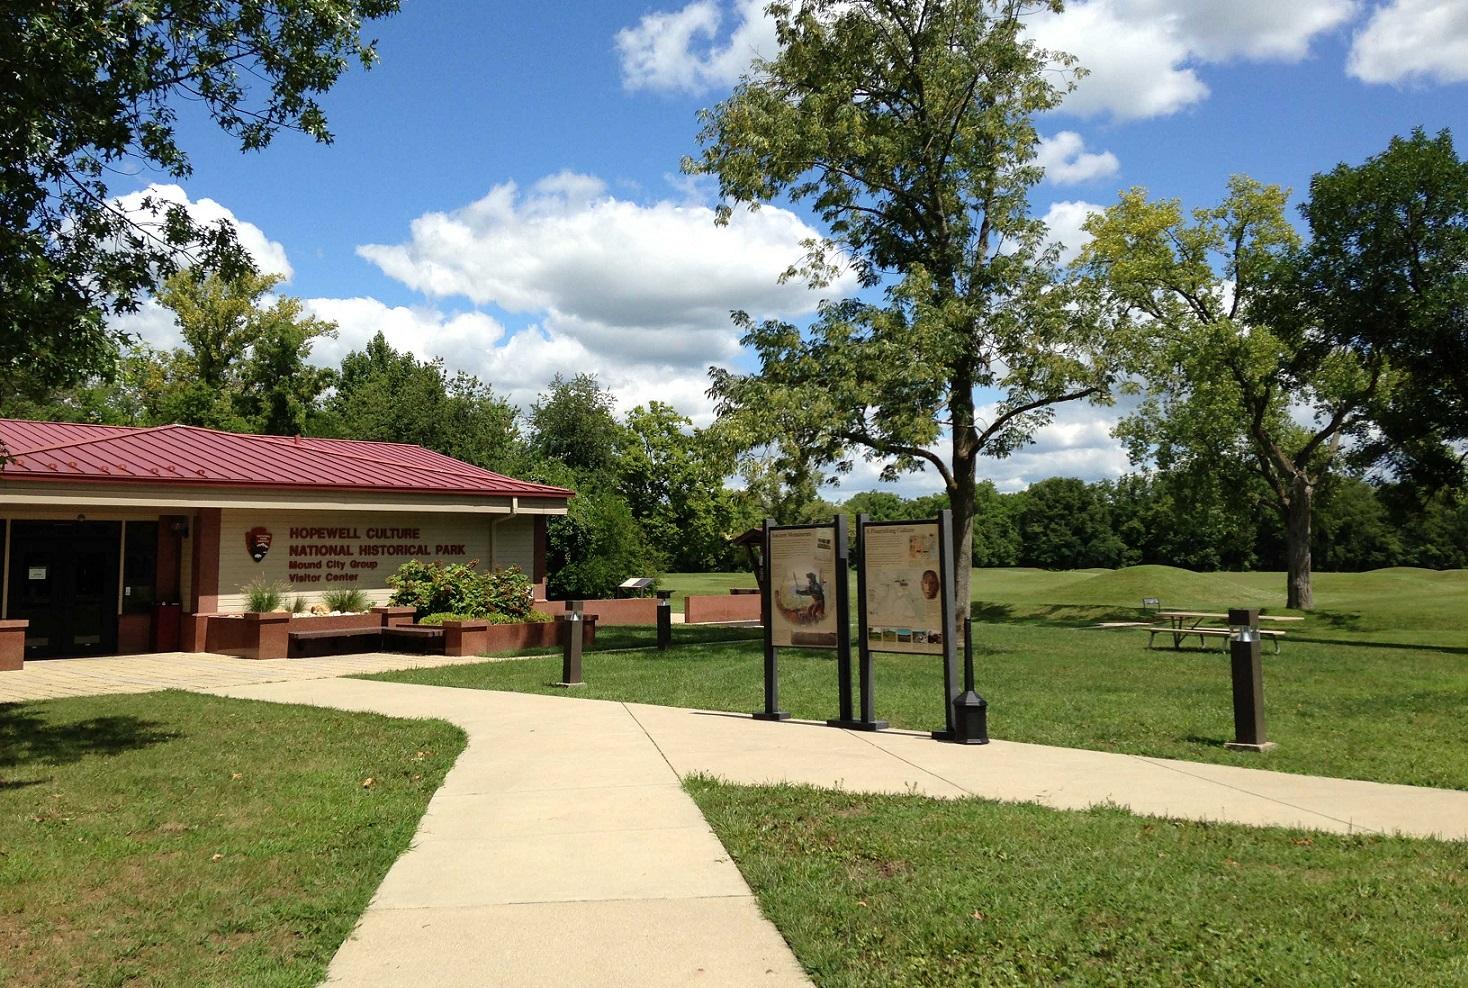 The Mound City Group visitor center